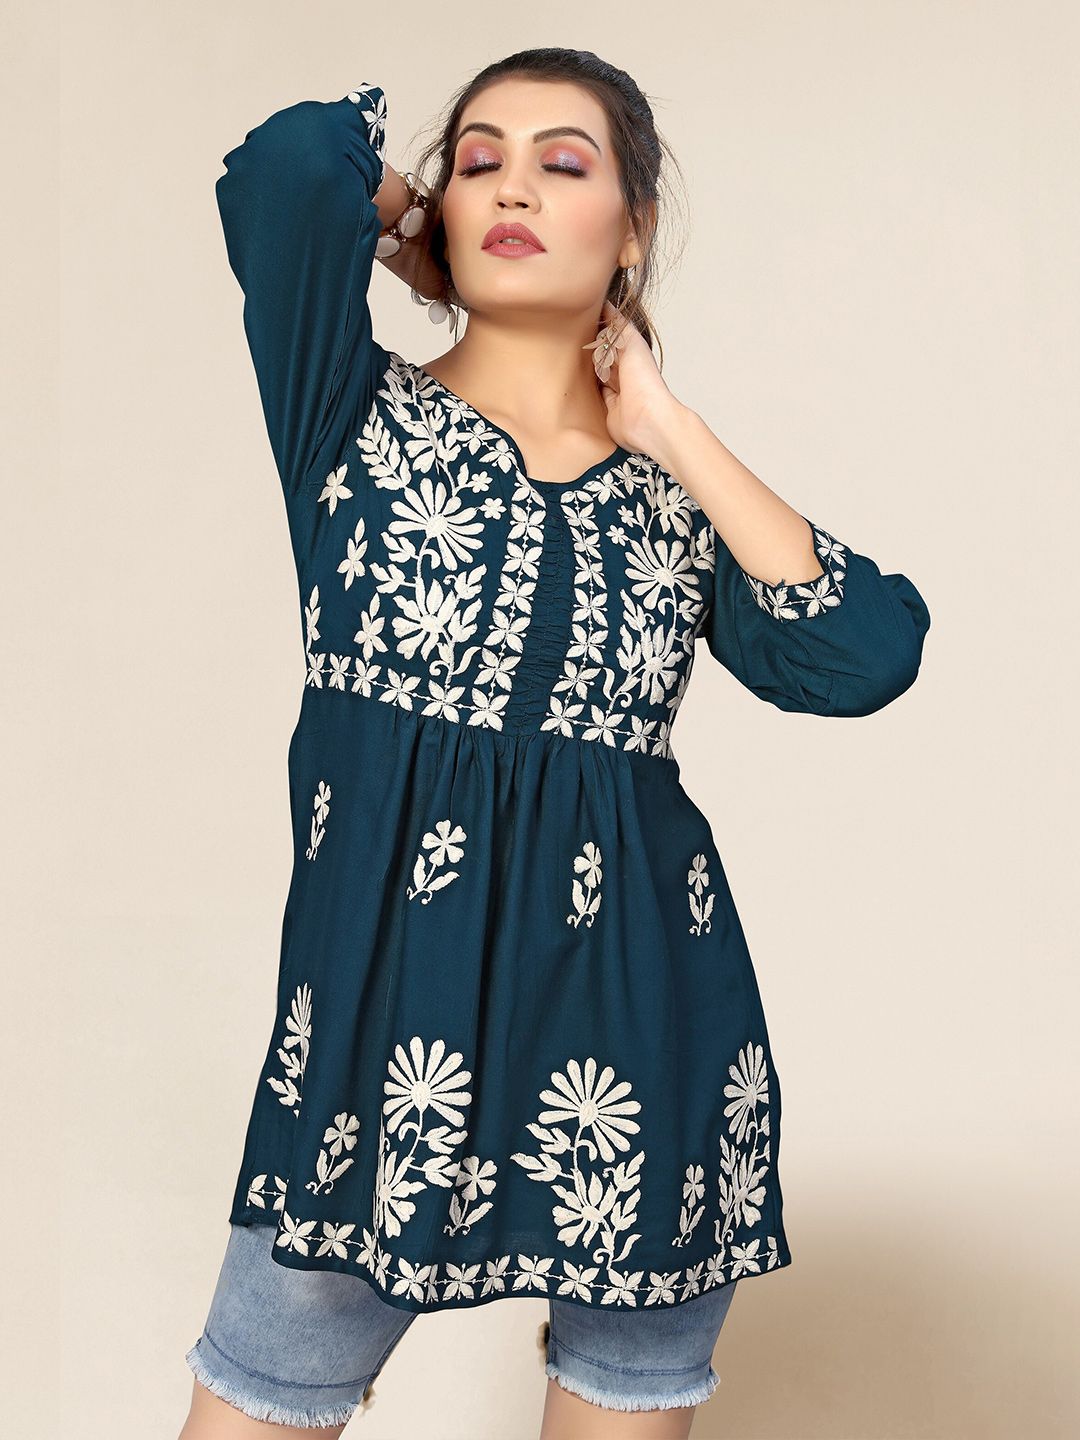 Winza Designer Women Blue Floral Embroidered Top Price in India